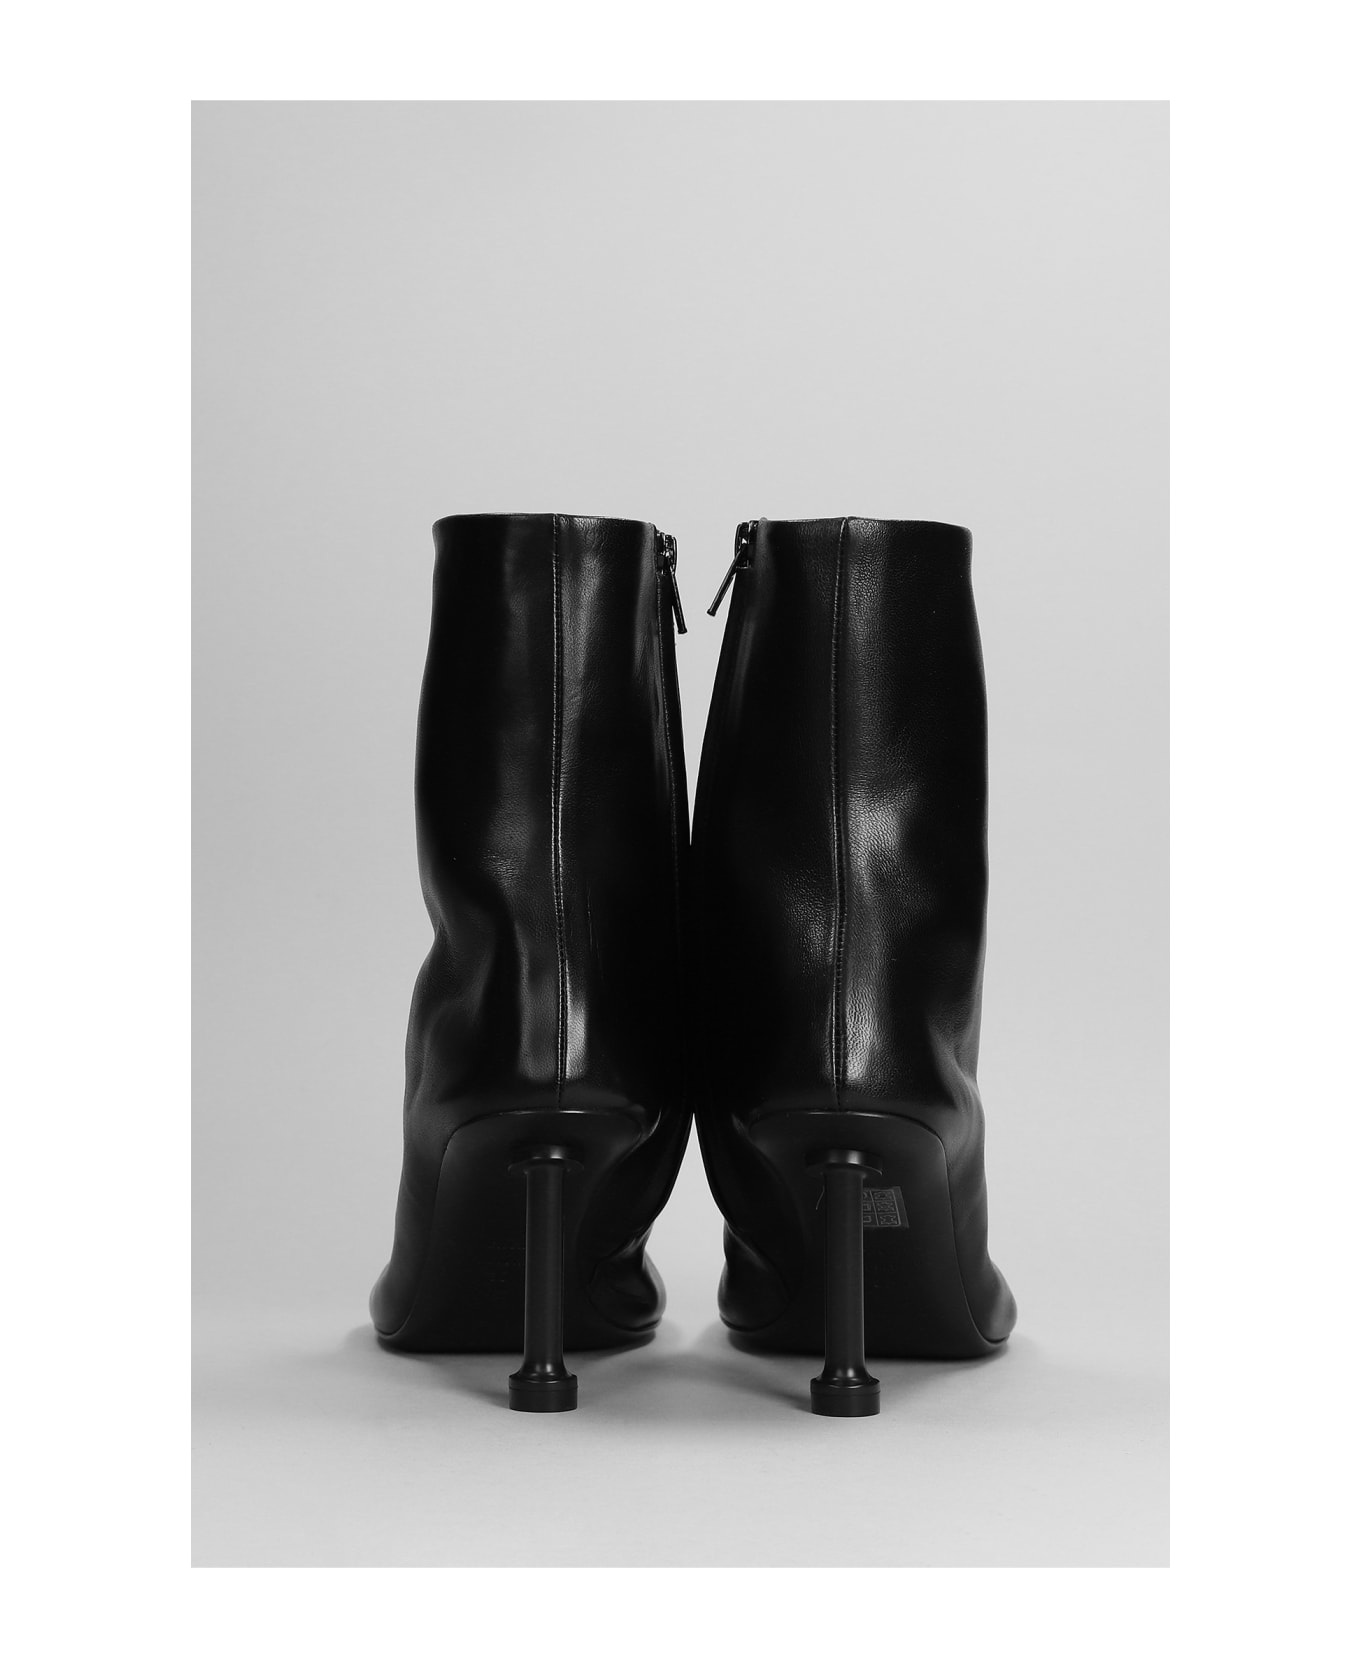 Balenciaga High Heels Ankle Boots In Black Leather - black